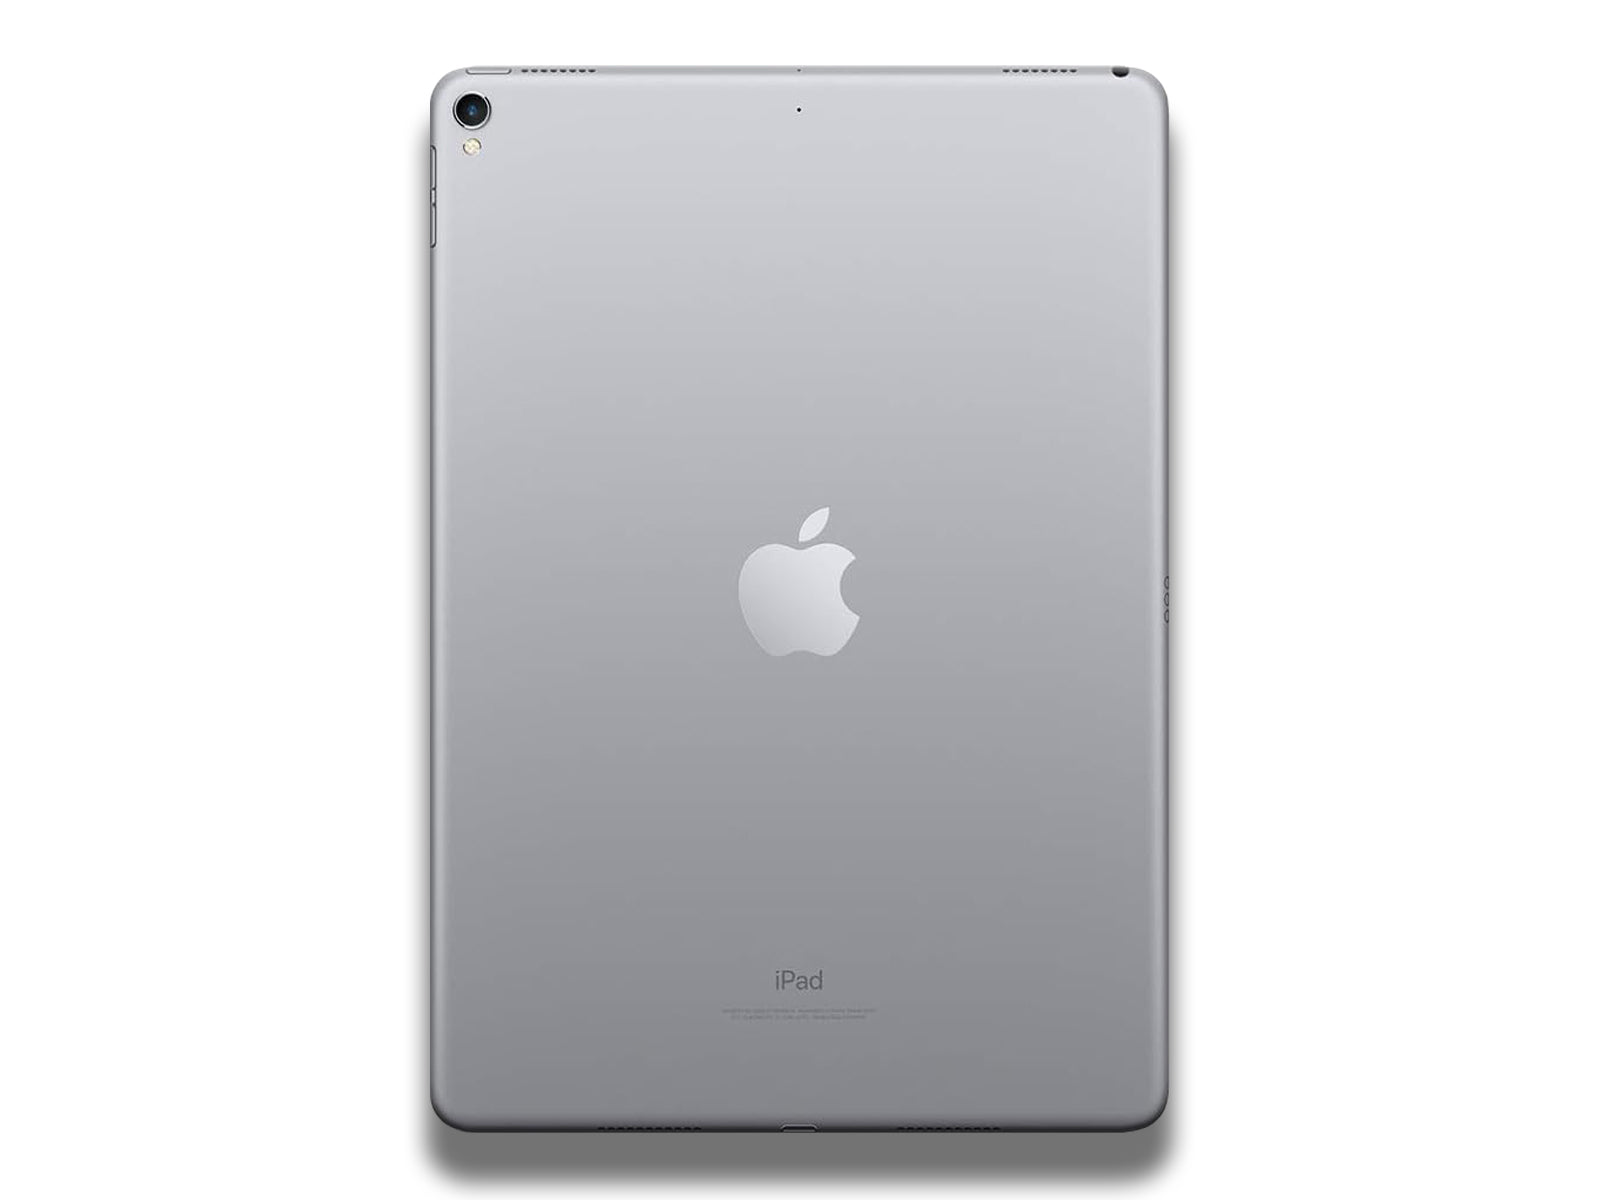 Apple iPad Pro 12.9-inch 2nd Generation back view in the colour silver